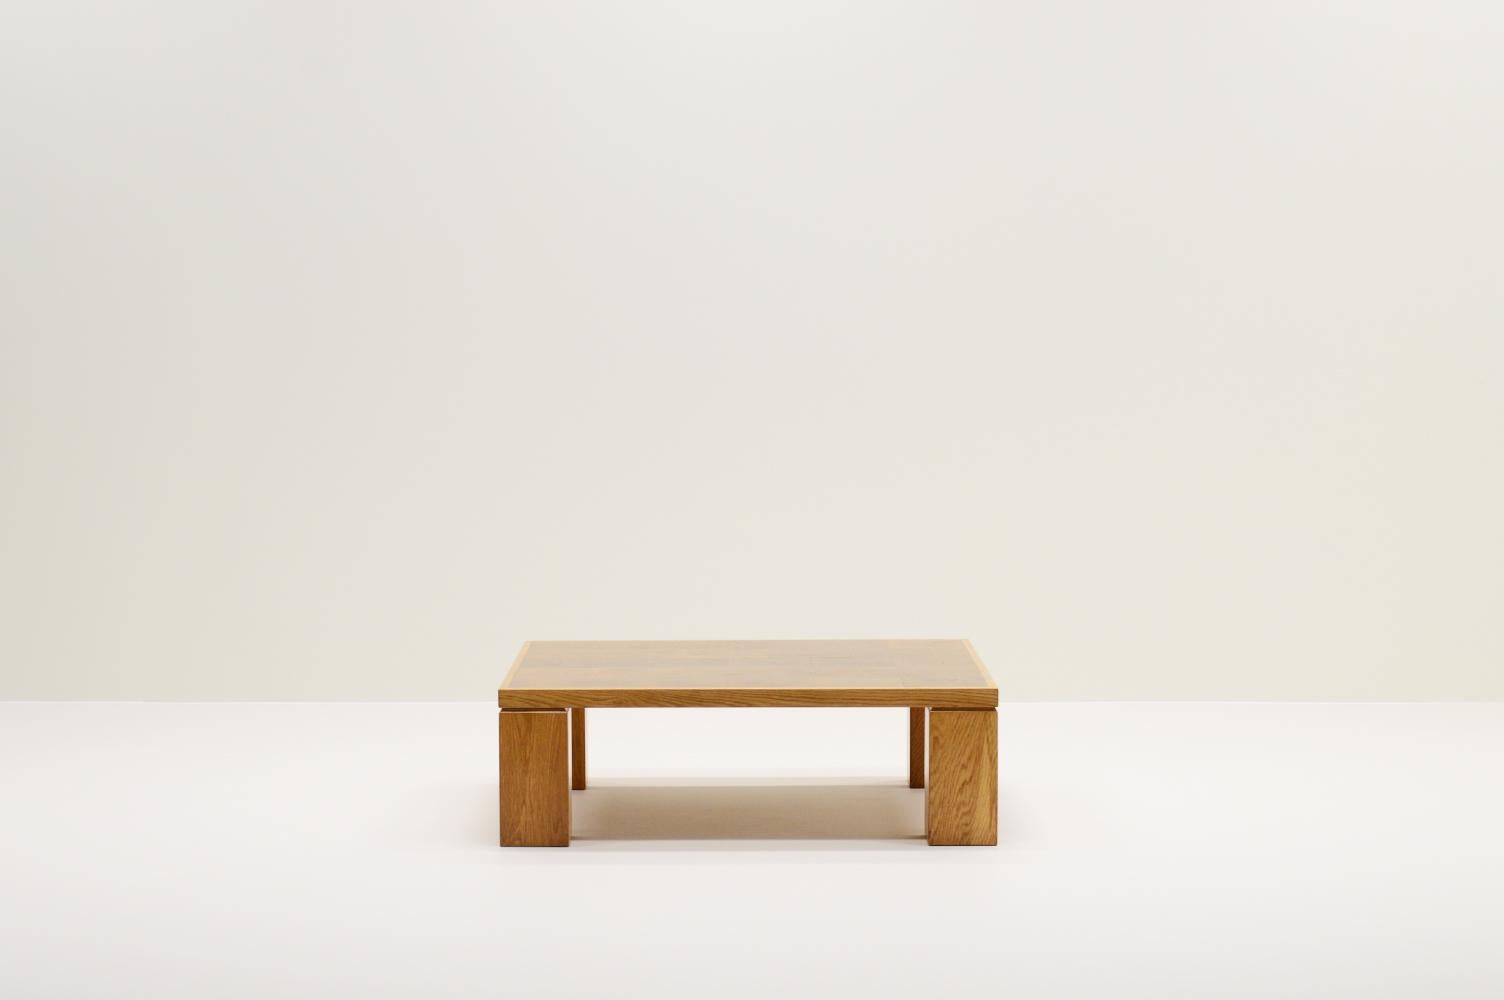 Rare oak coffee table from Rolf Middelboe & Gorm Lindum for Tranekaer, Denmark 1970s. Top is made of large square cross section pieces of oak in a oak frame on oak legs. Professionally refinished and in very good vintage condition. 

